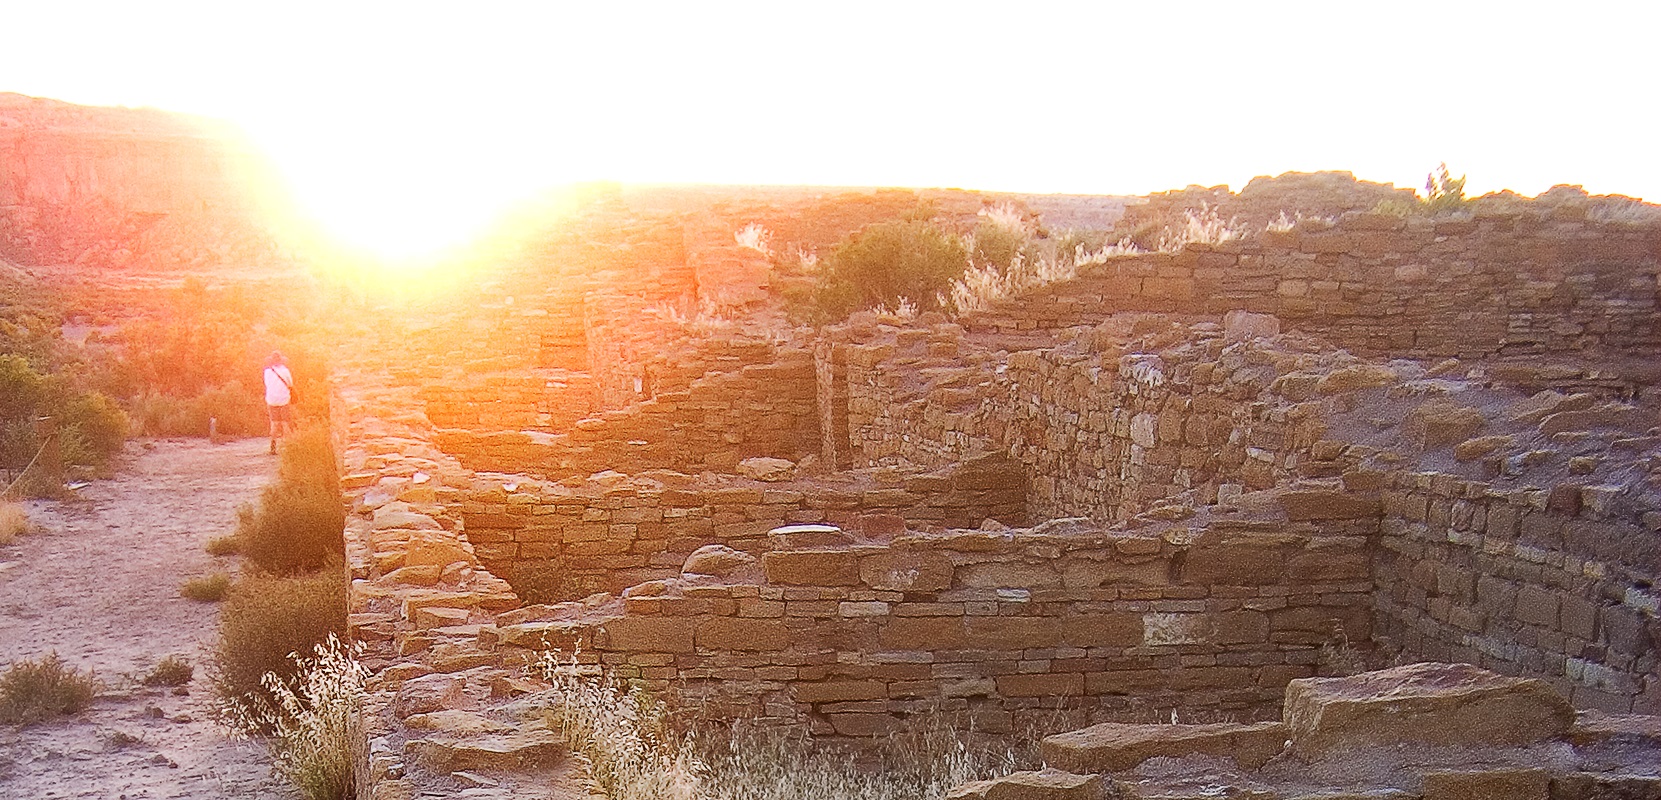 LiDAR and 3D modeling Reveal Untold Stories of Chaco Canyon